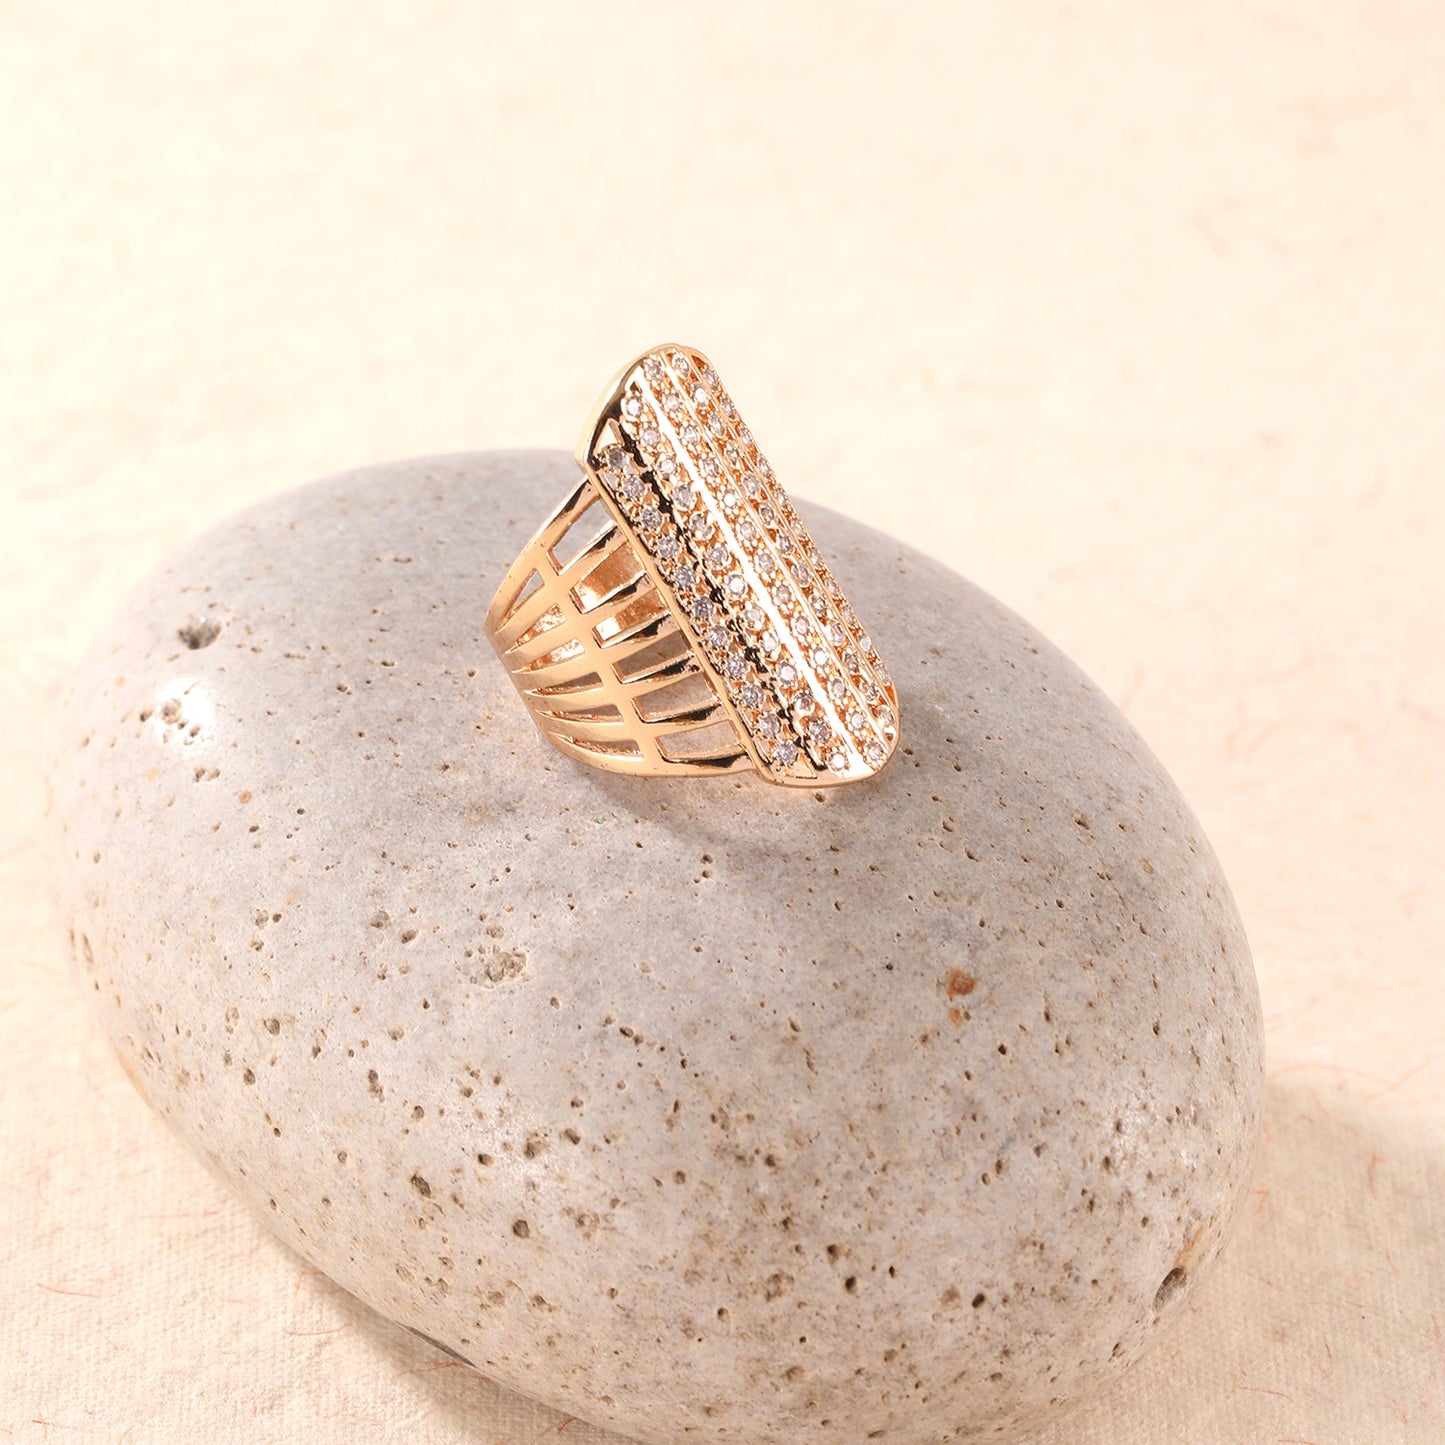 Gold Layered Statement Ring with Serenity Stones